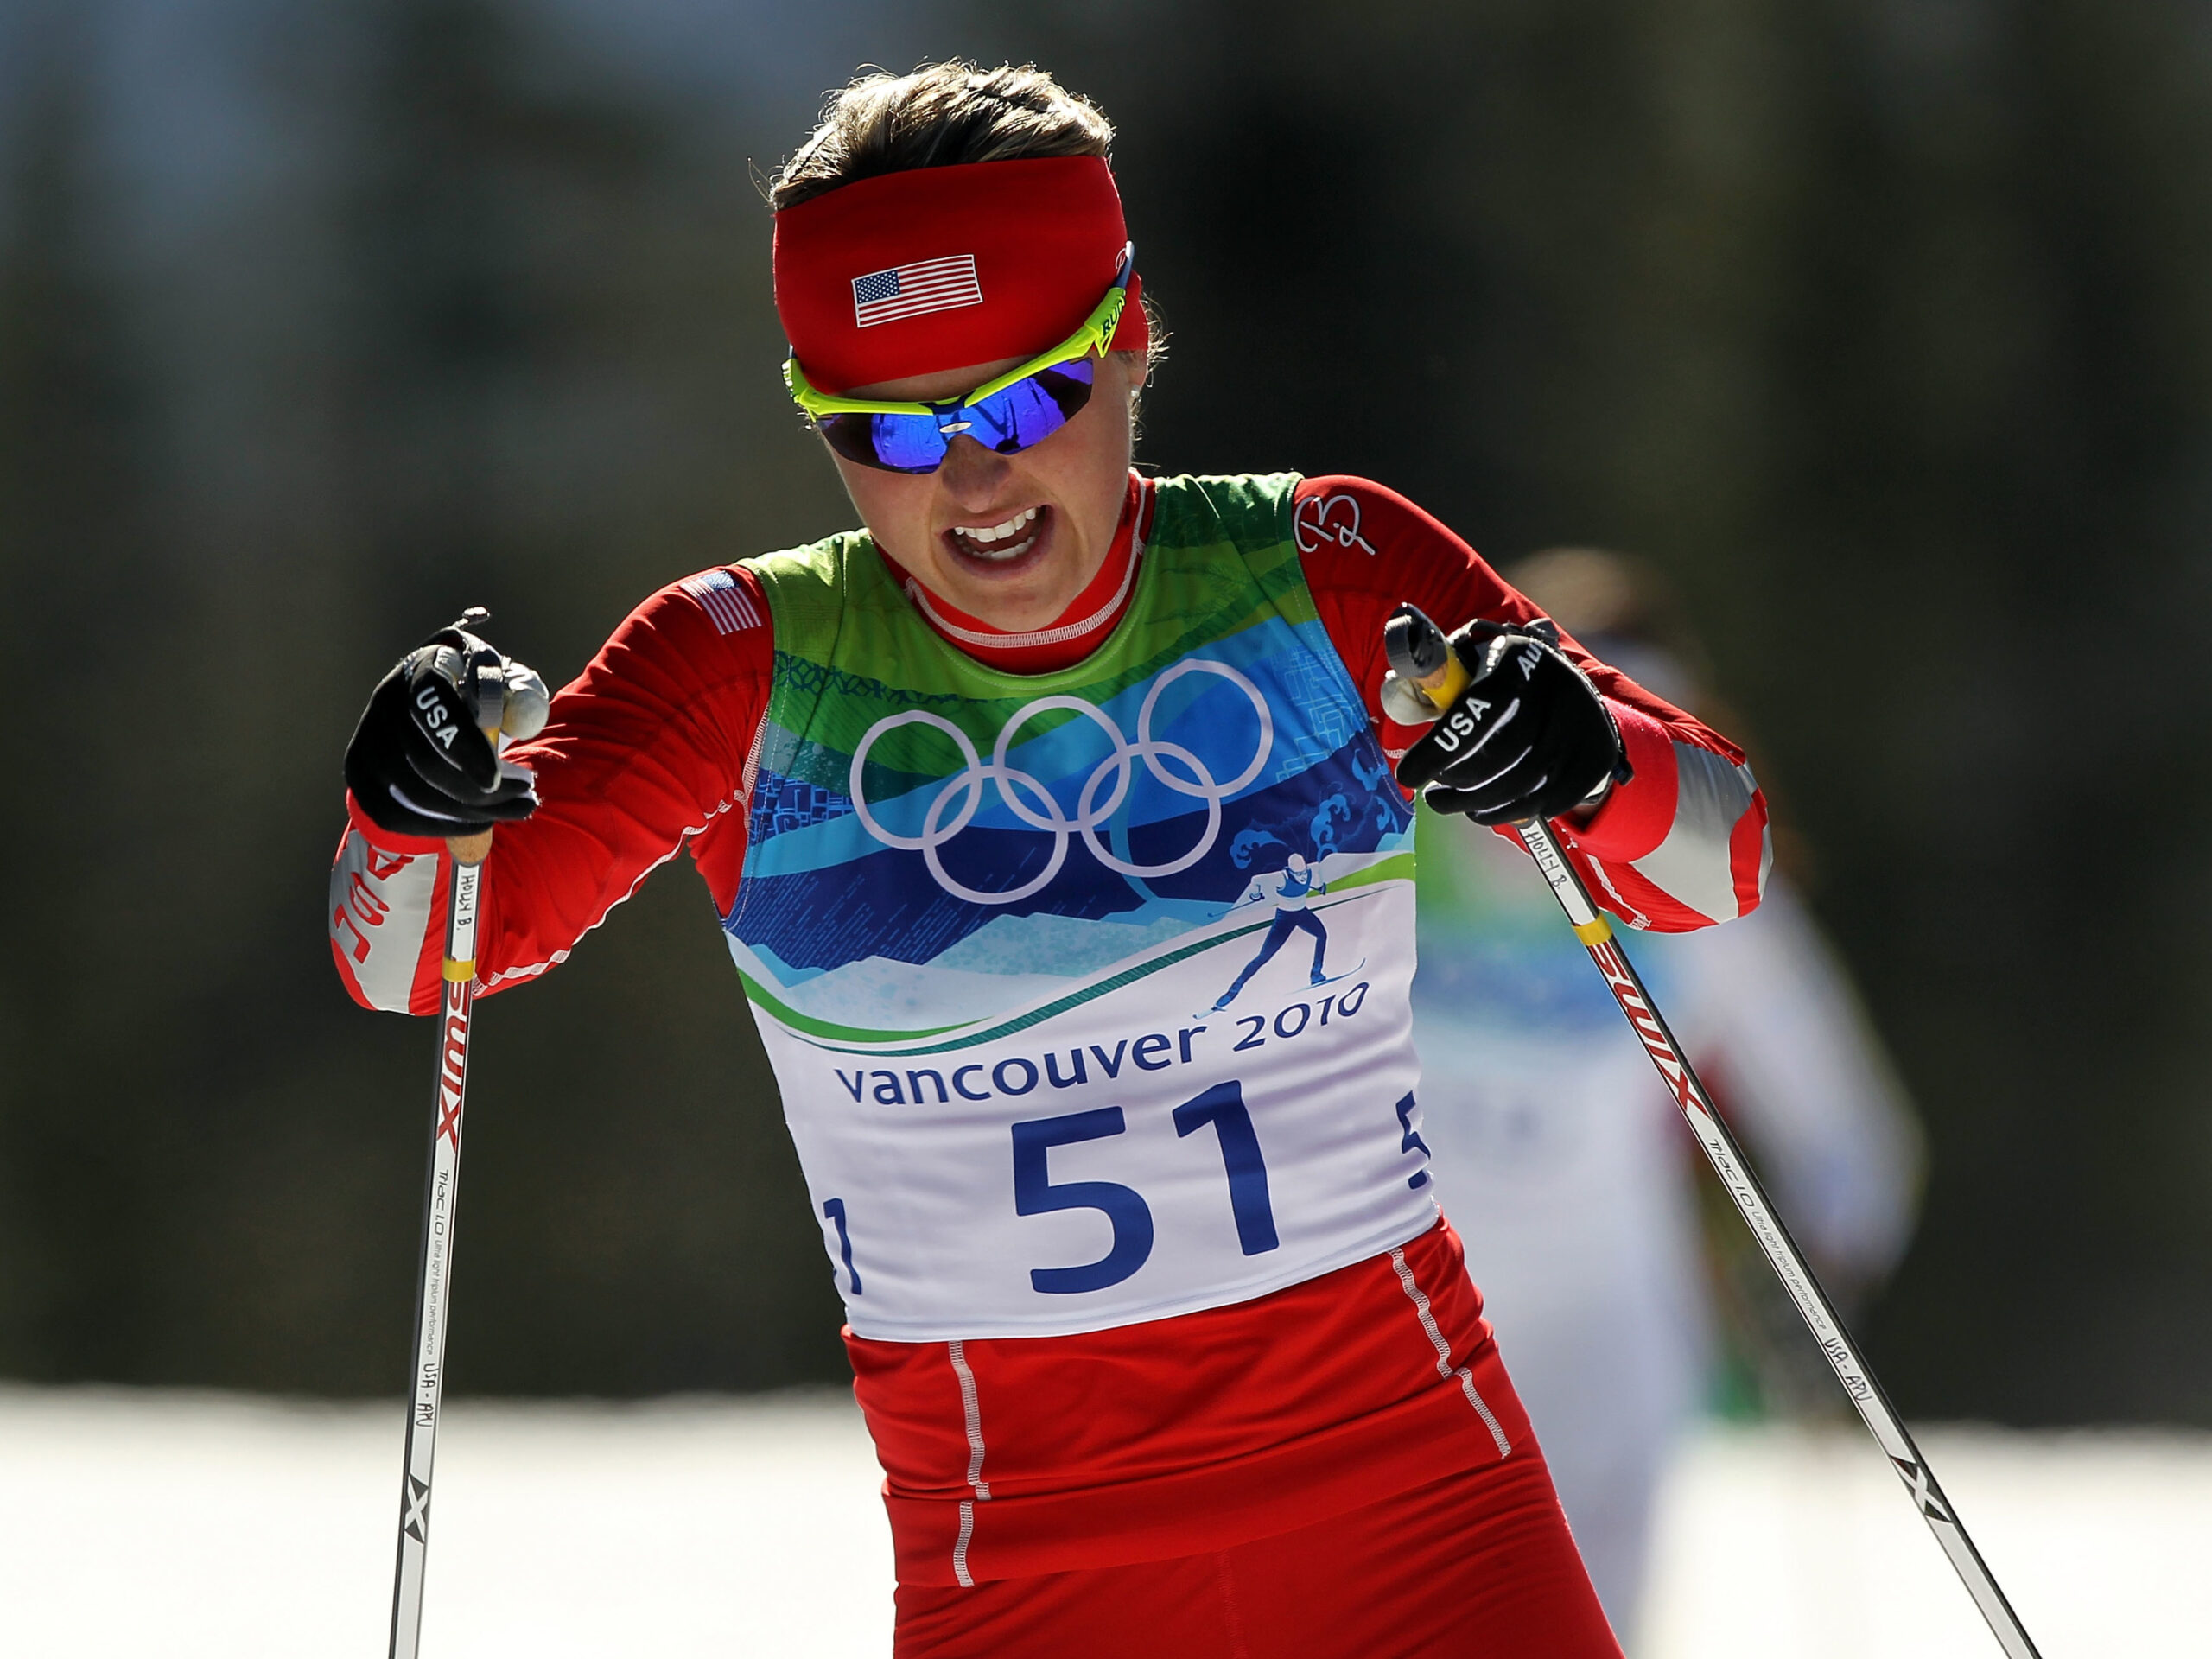 A woman skiing in the Olympics